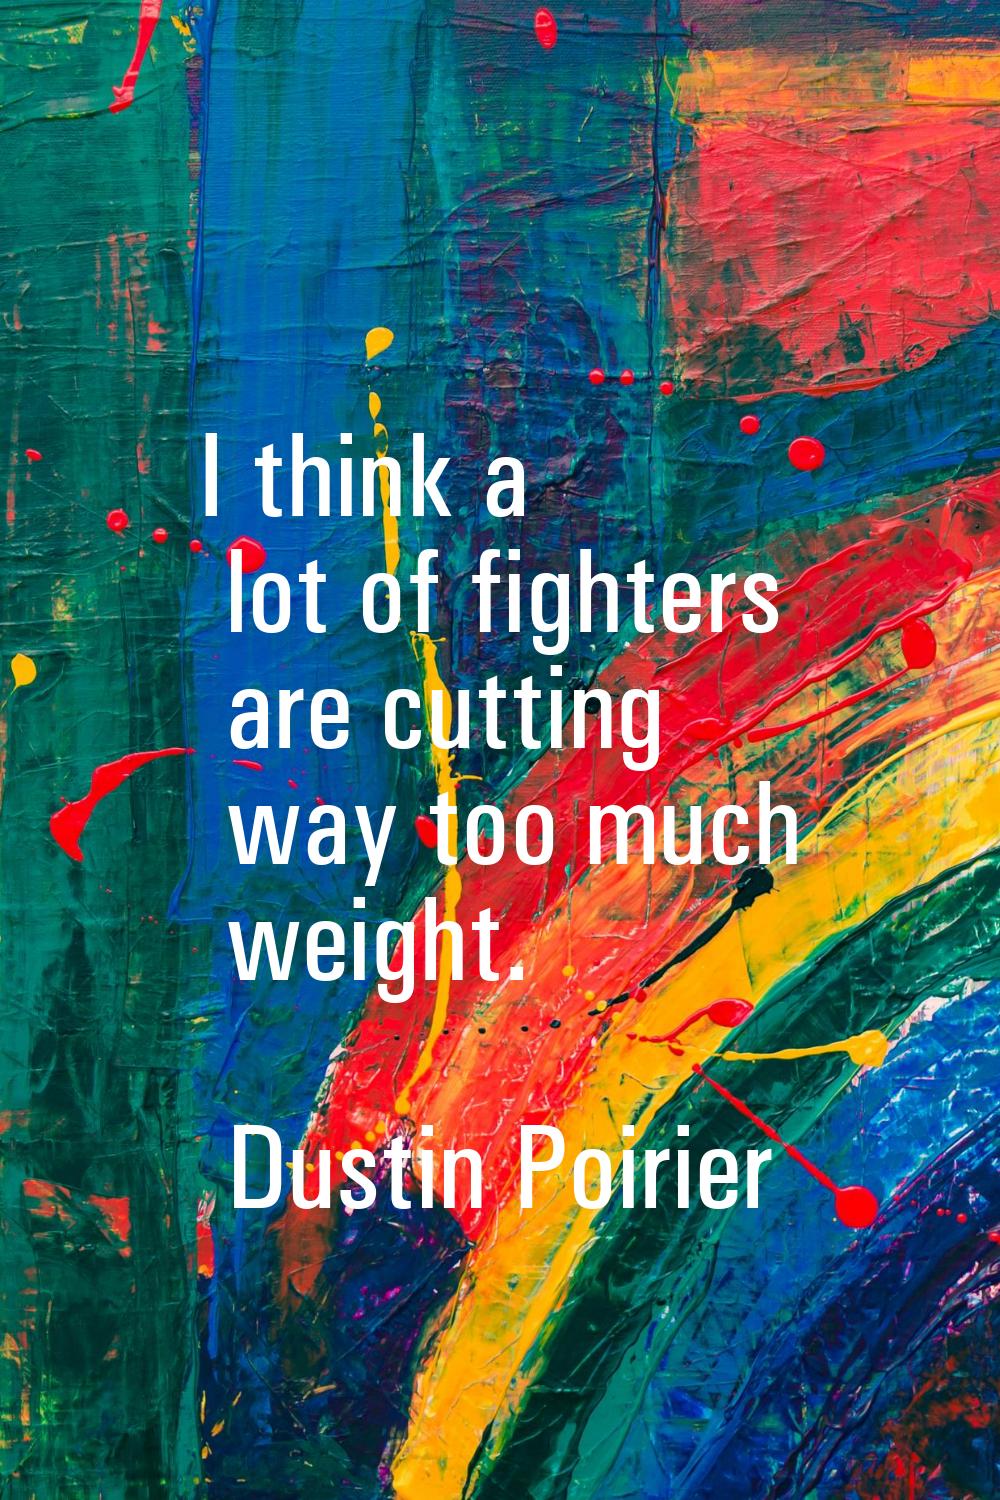 I think a lot of fighters are cutting way too much weight.